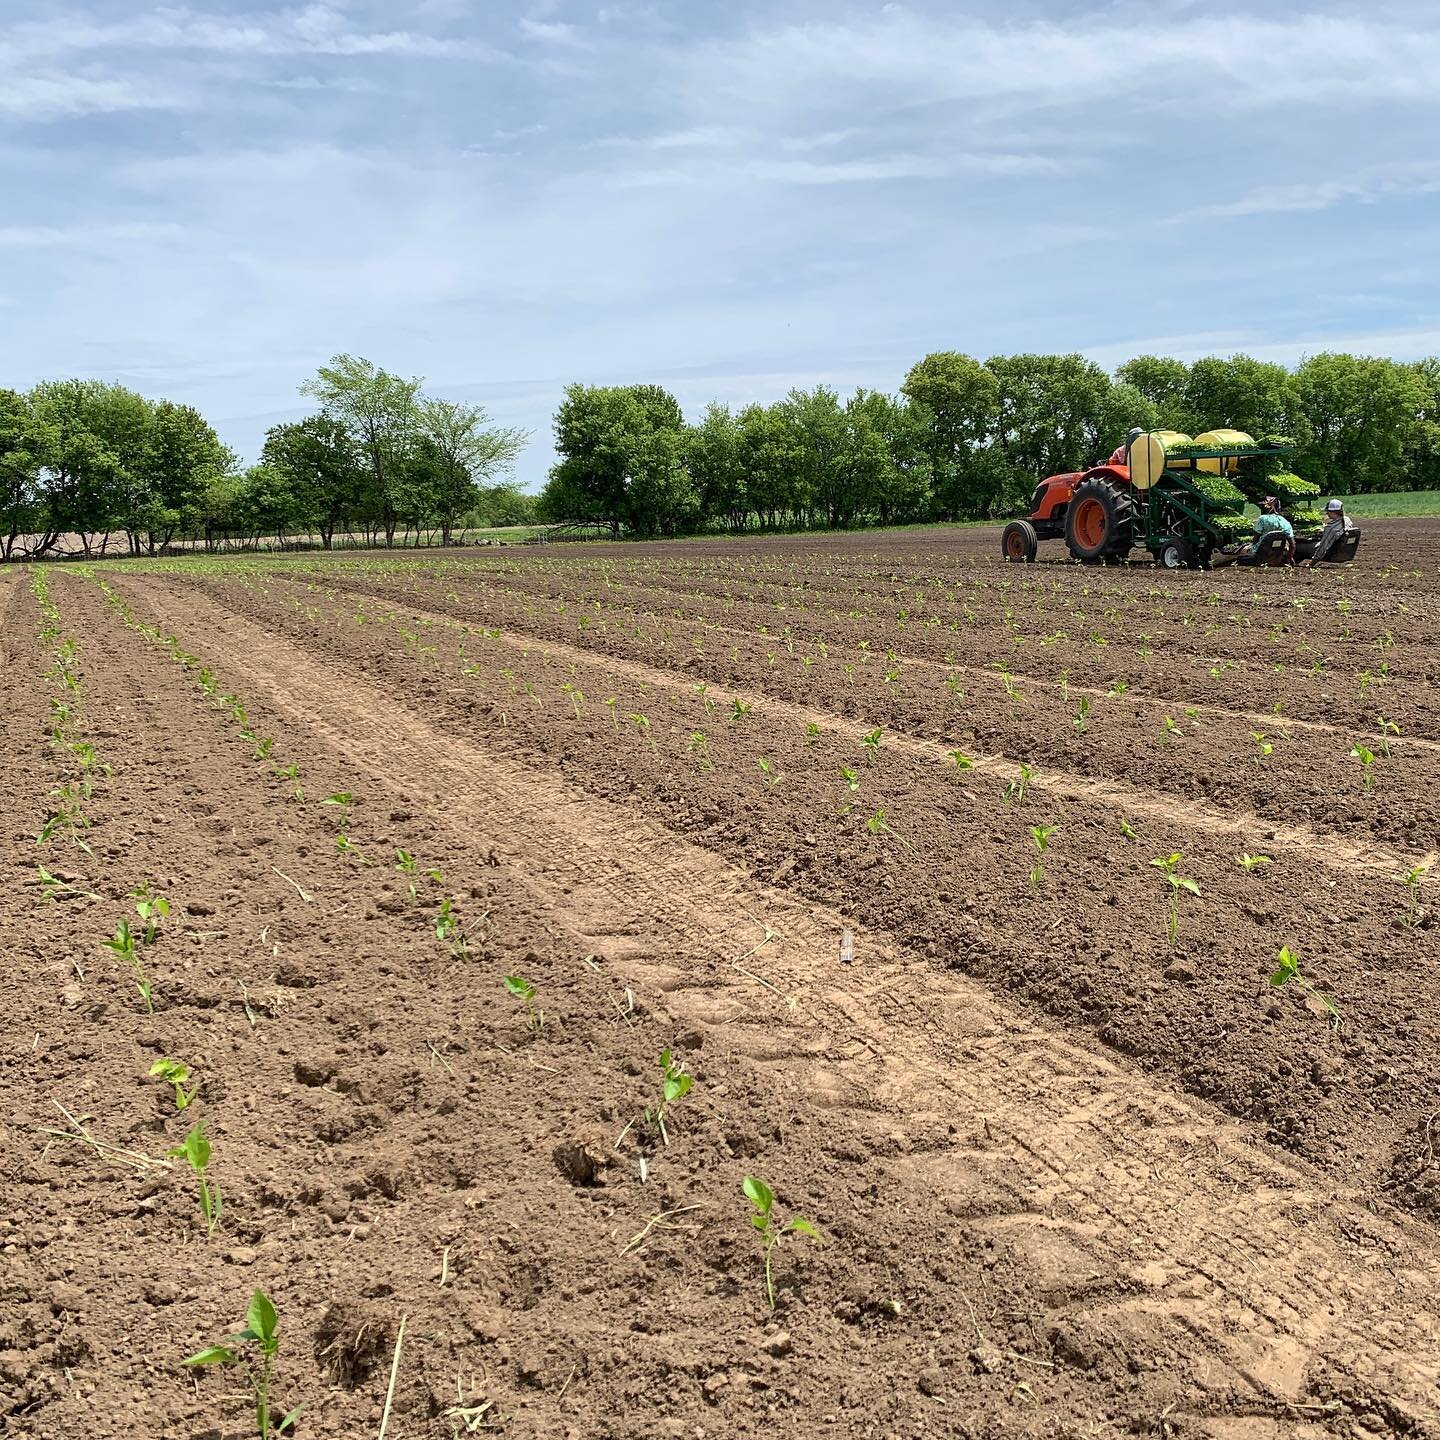 We were lucky to spend two beautiful days transplanting peppers - about two acres in total. Now bring on the soaking rain forecast for tomorrow 💧